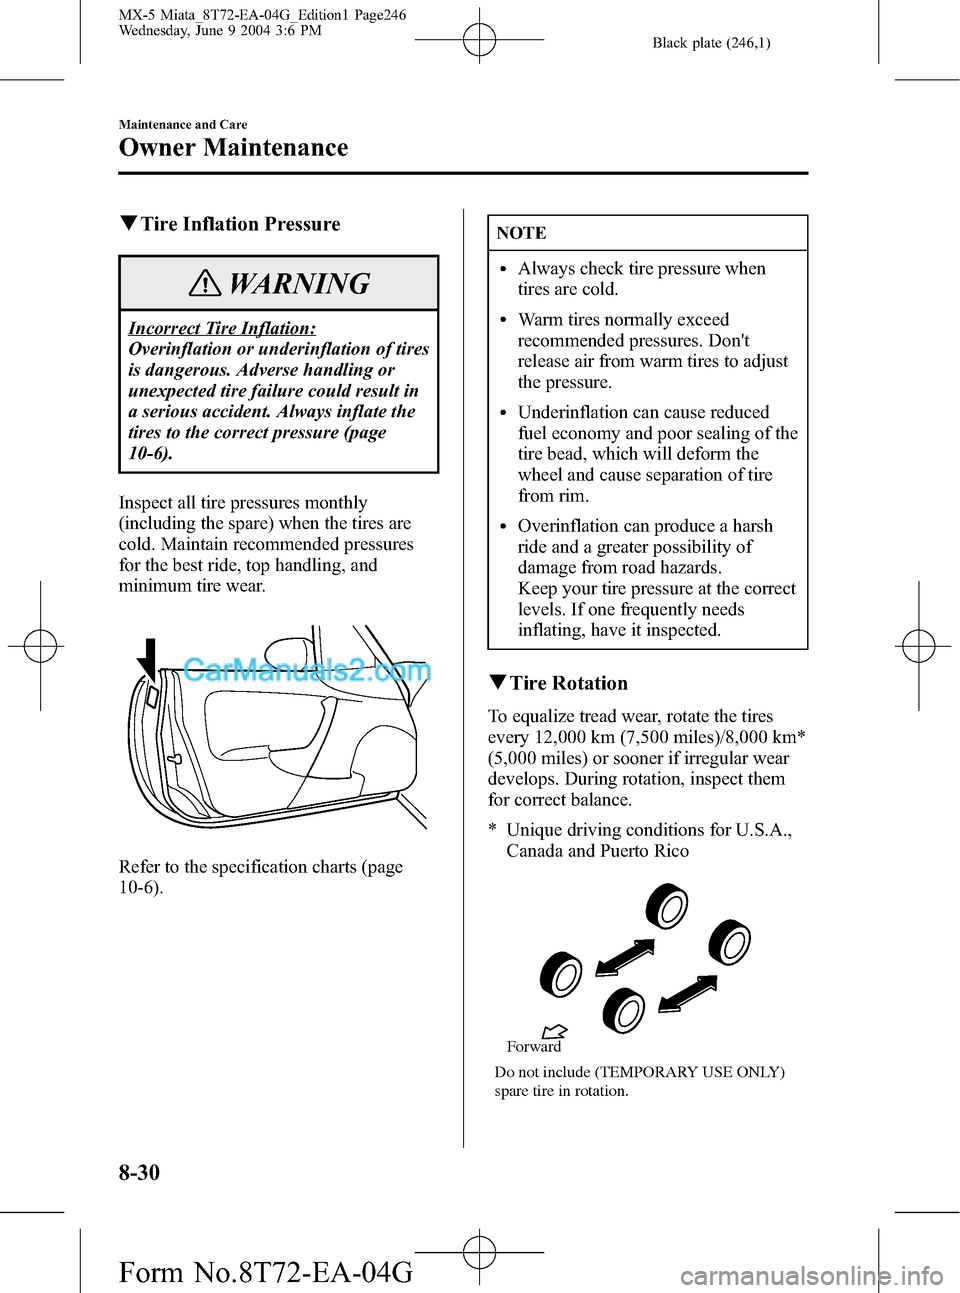 MAZDA MODEL MX-5 2005  Owners Manual (in English) Black plate (246,1)
qTire Inflation Pressure
WARNING
Incorrect Tire Inflation:
Overinflation or underinflation of tires
is dangerous. Adverse handling or
unexpected tire failure could result in
a seri